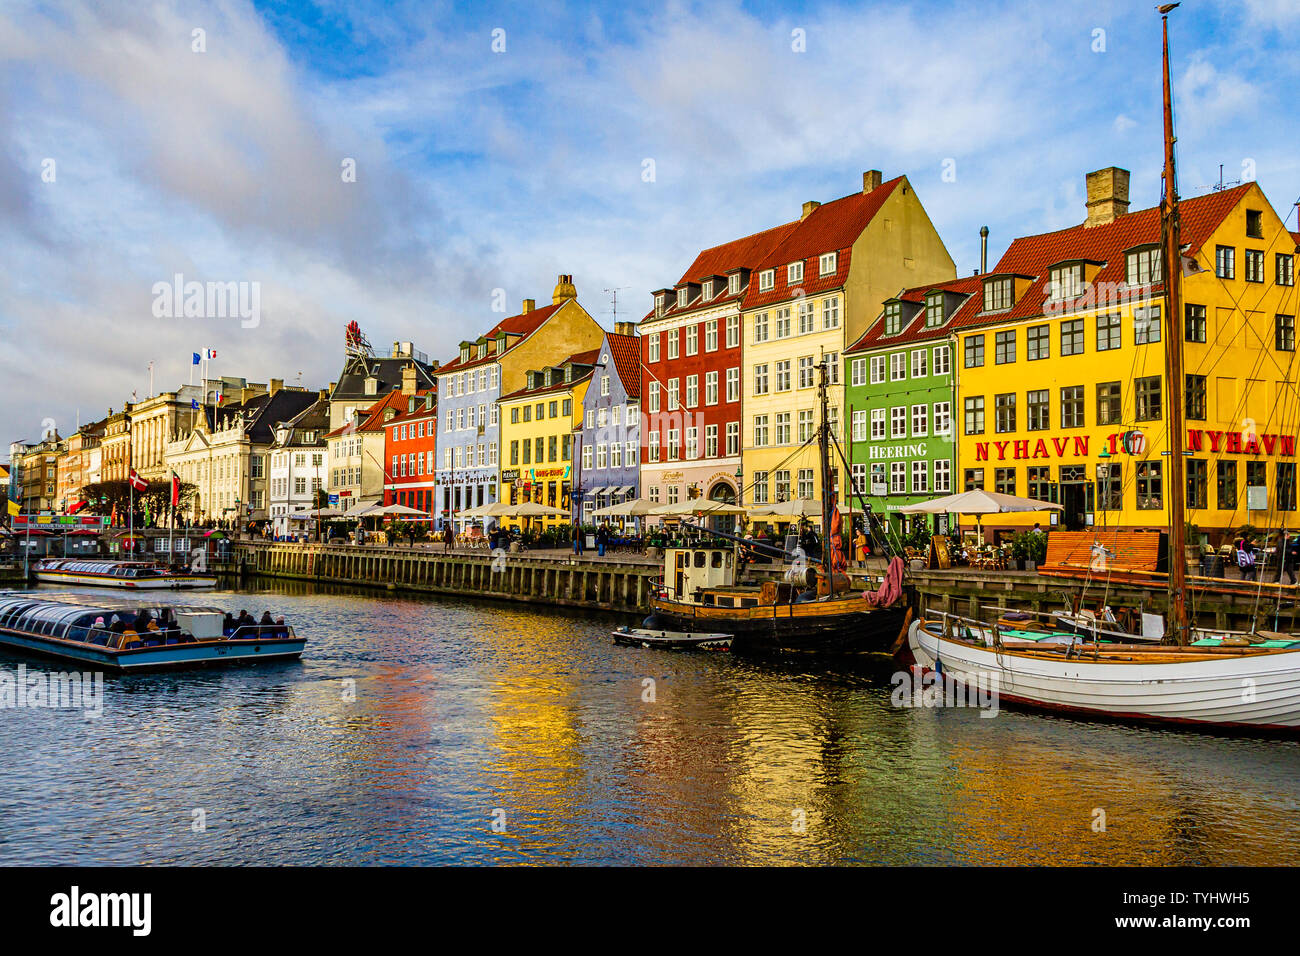 Nyhavn, a 17th century canal and harbour area with bars and restaurants and popular with tourists, in the capital city of Copenhagen, Denmark. 2019. Stock Photo